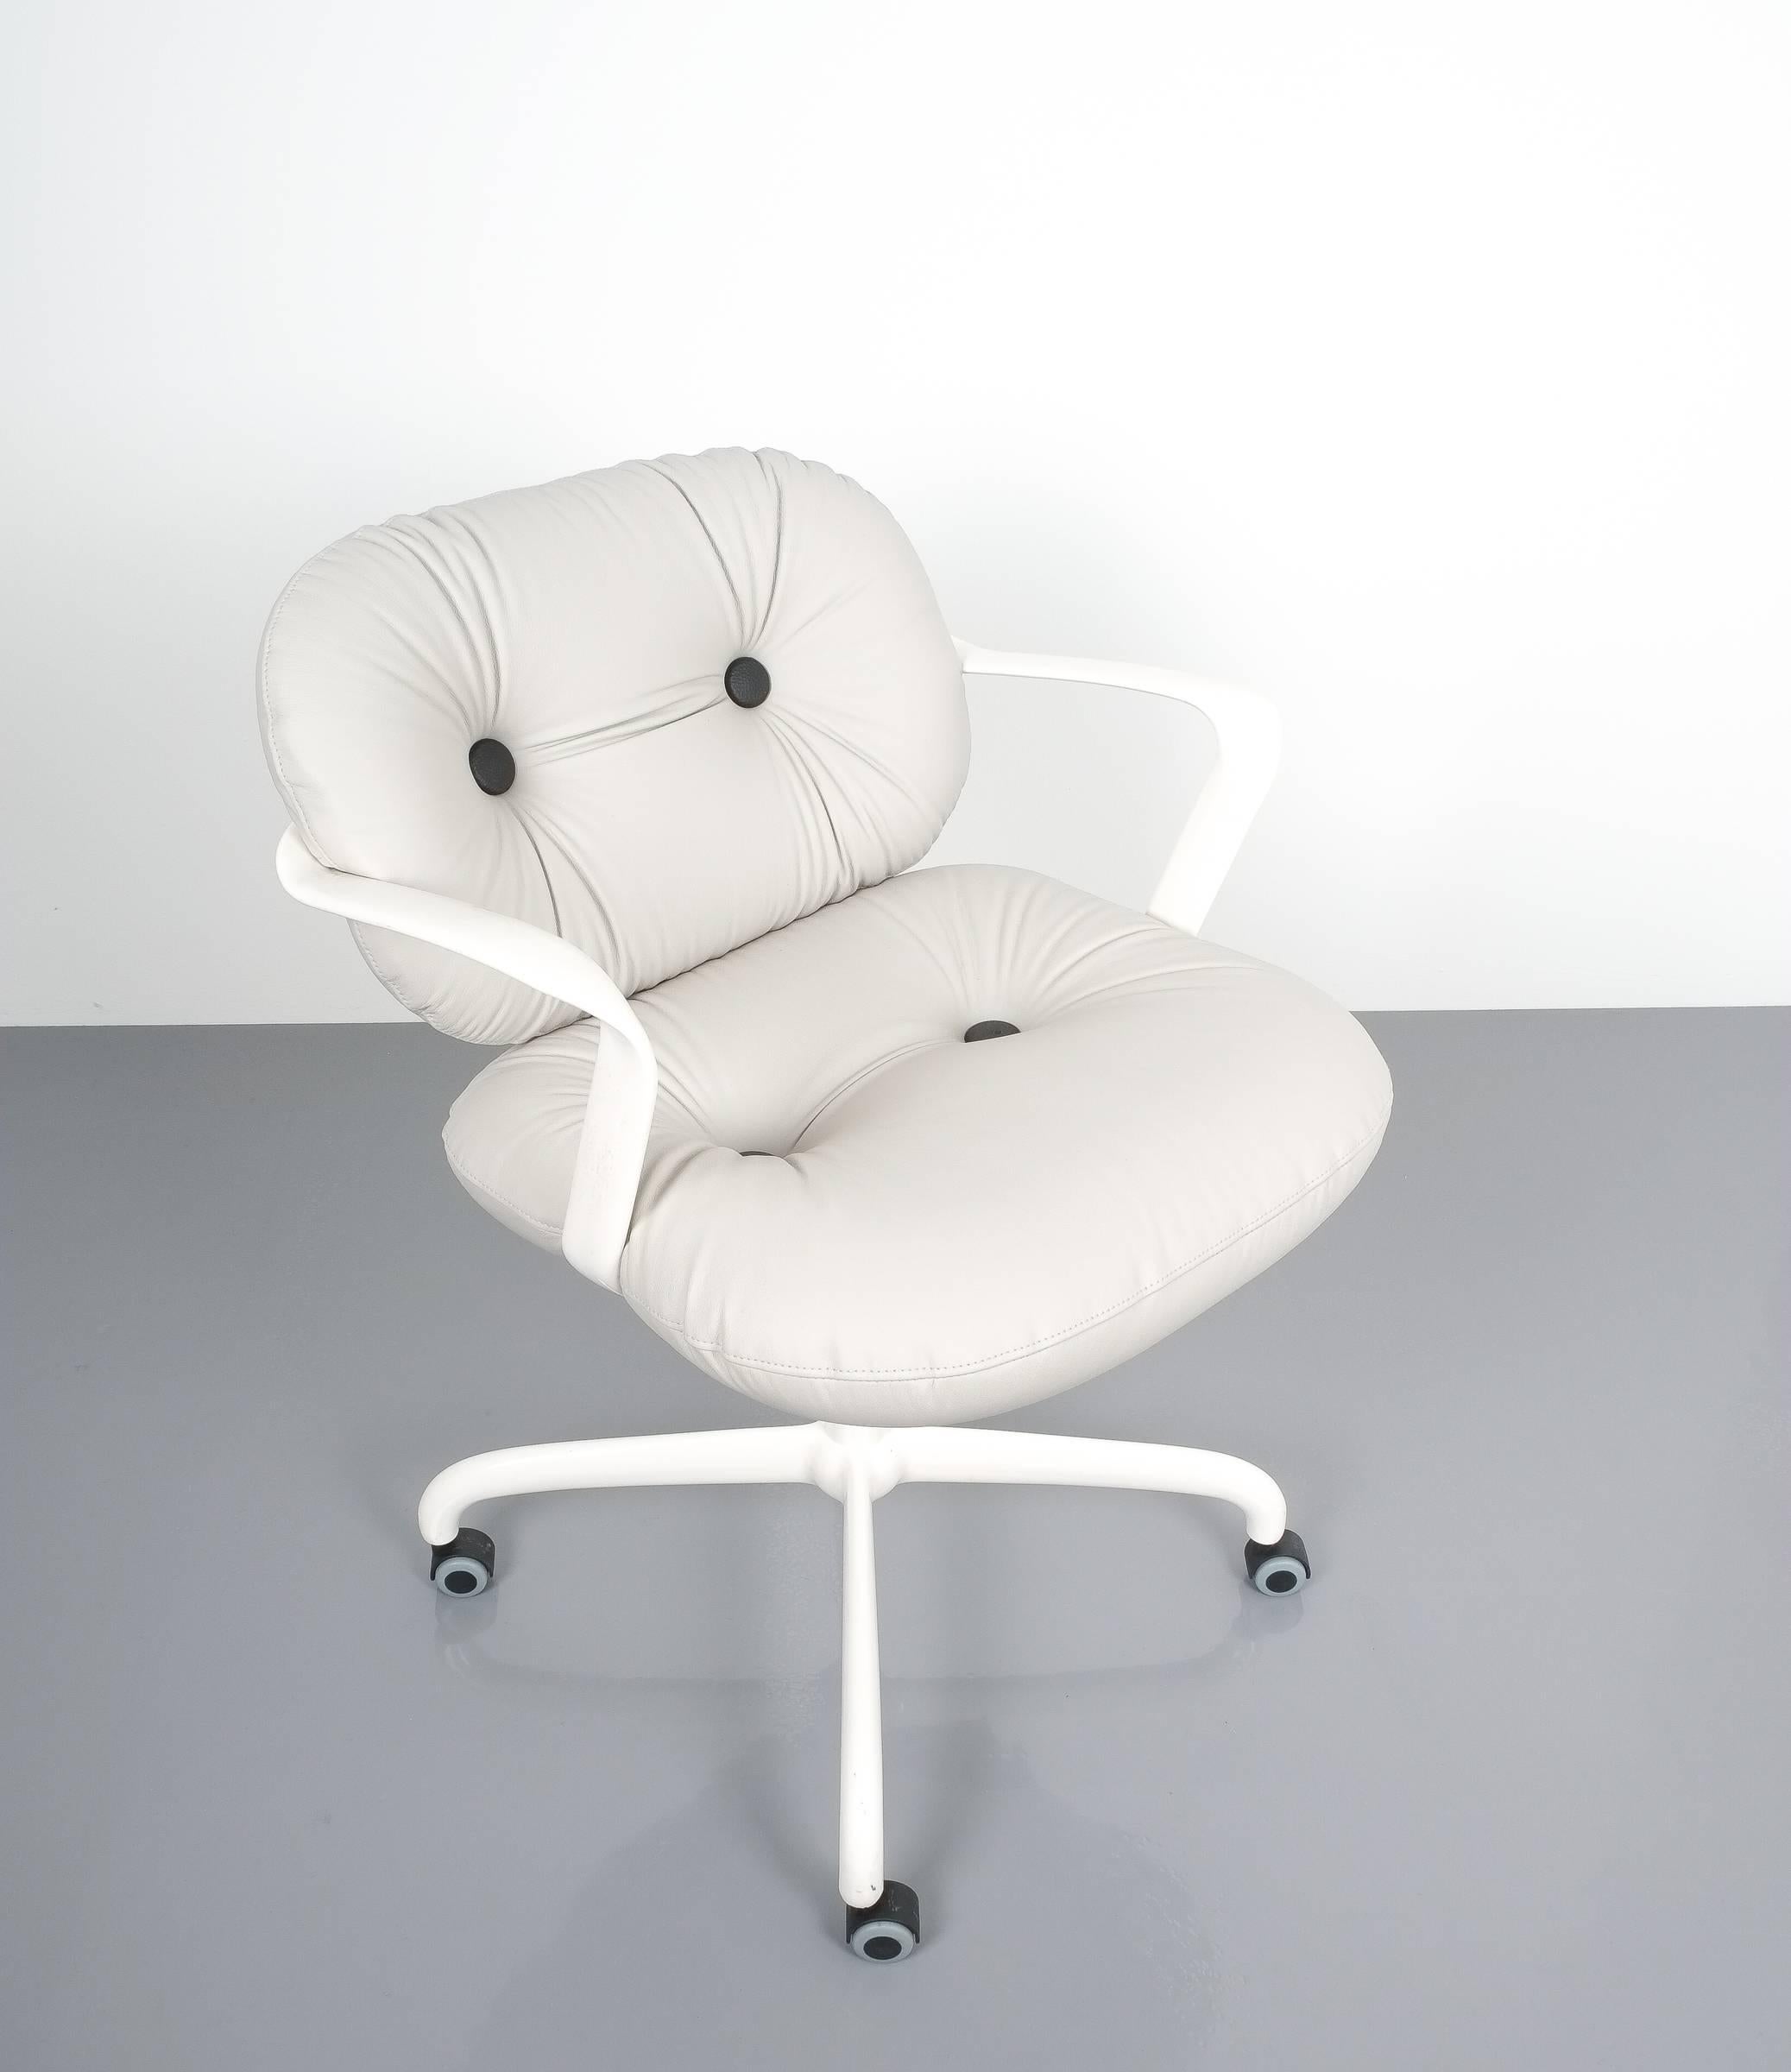 Steel Andrew Morrison and Bruce Hannah for Knoll Office Chair Grey Leather, 1975